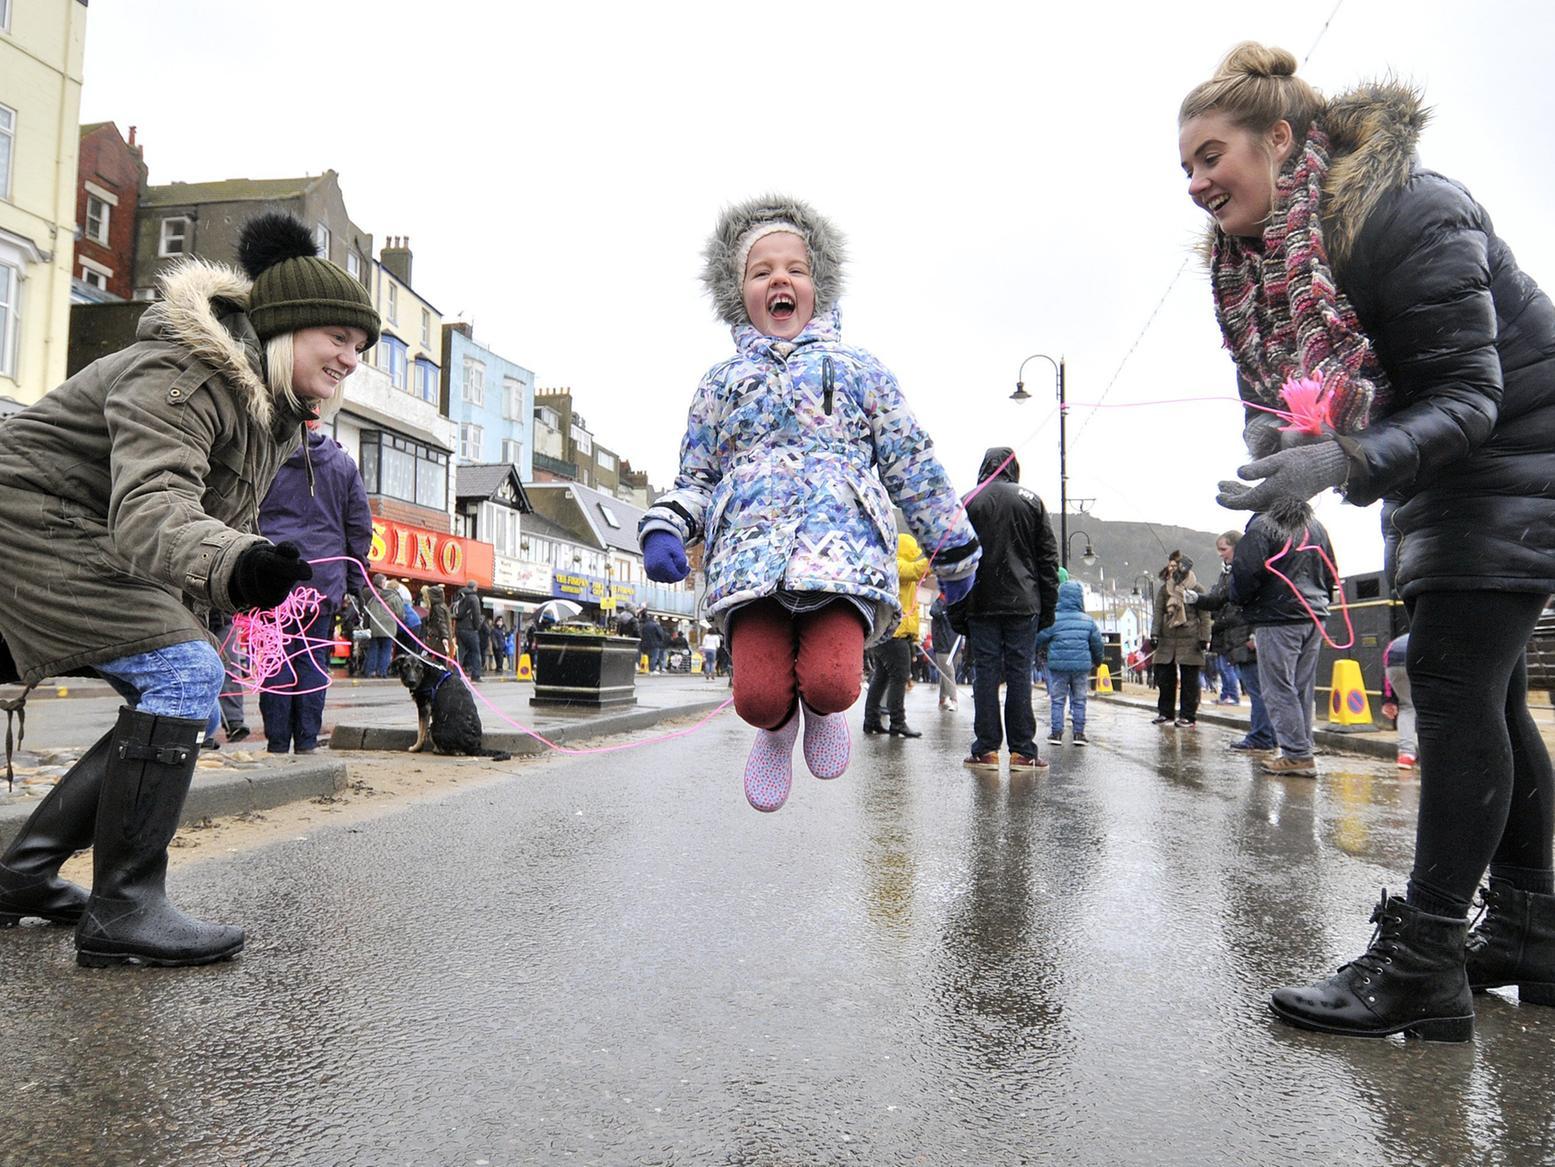 Pancake Day traditions weren't stopped by the rainy weather ant many residents gathered on the Foreshore for skipping, and pancake racing.